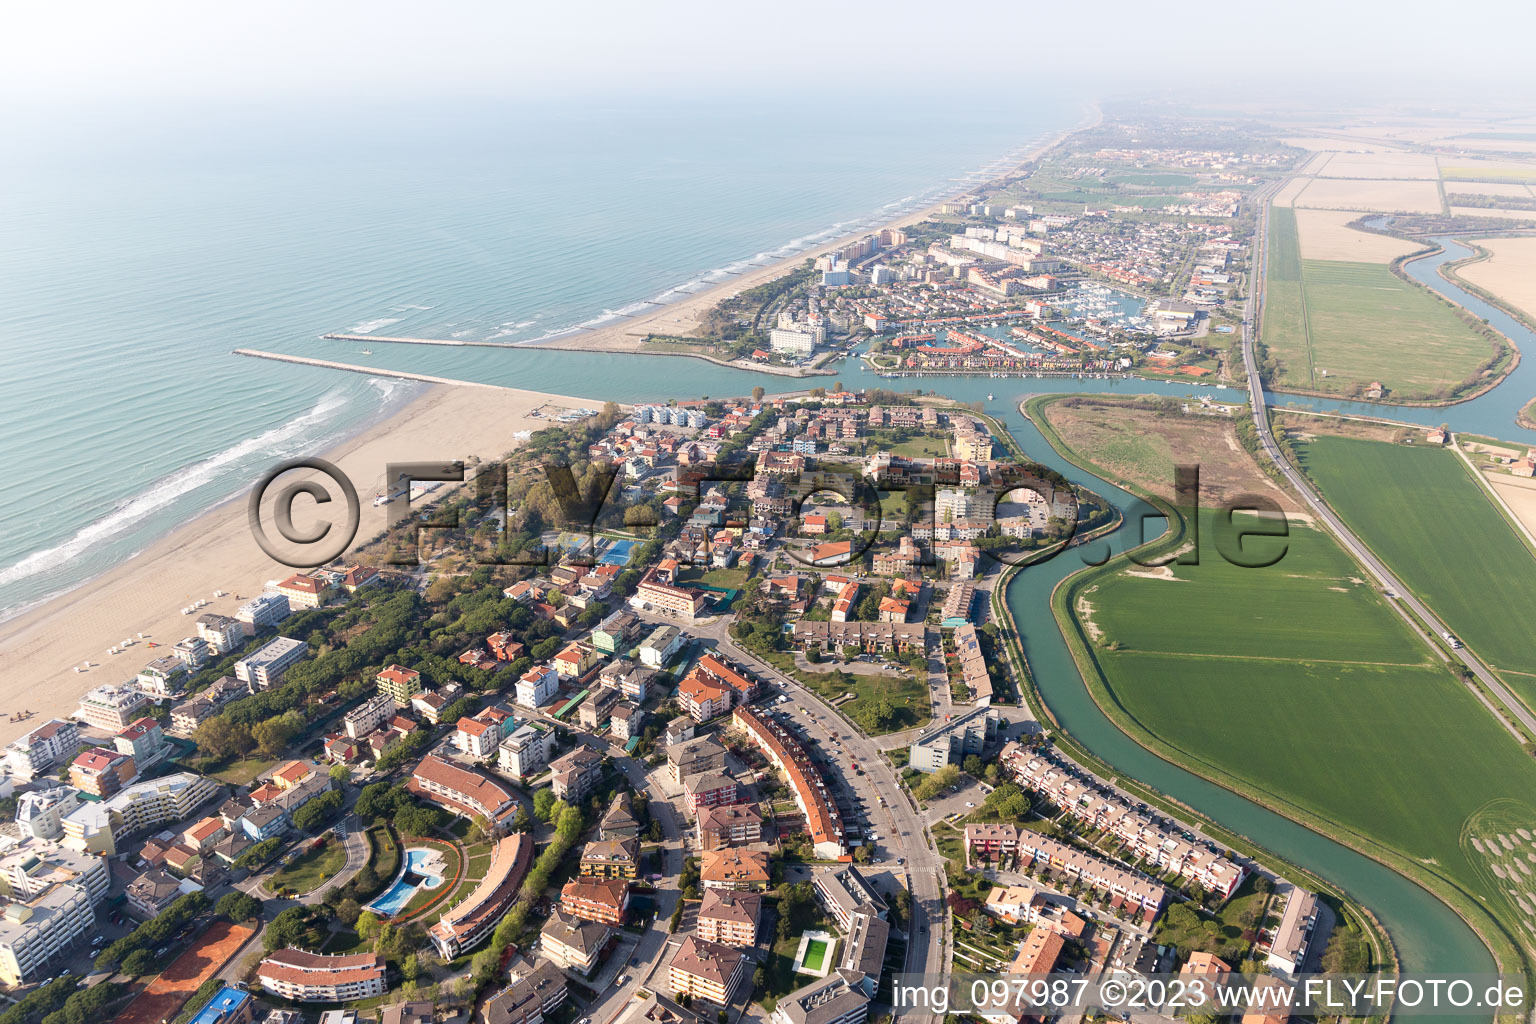 Caorle in the state Veneto, Italy from above